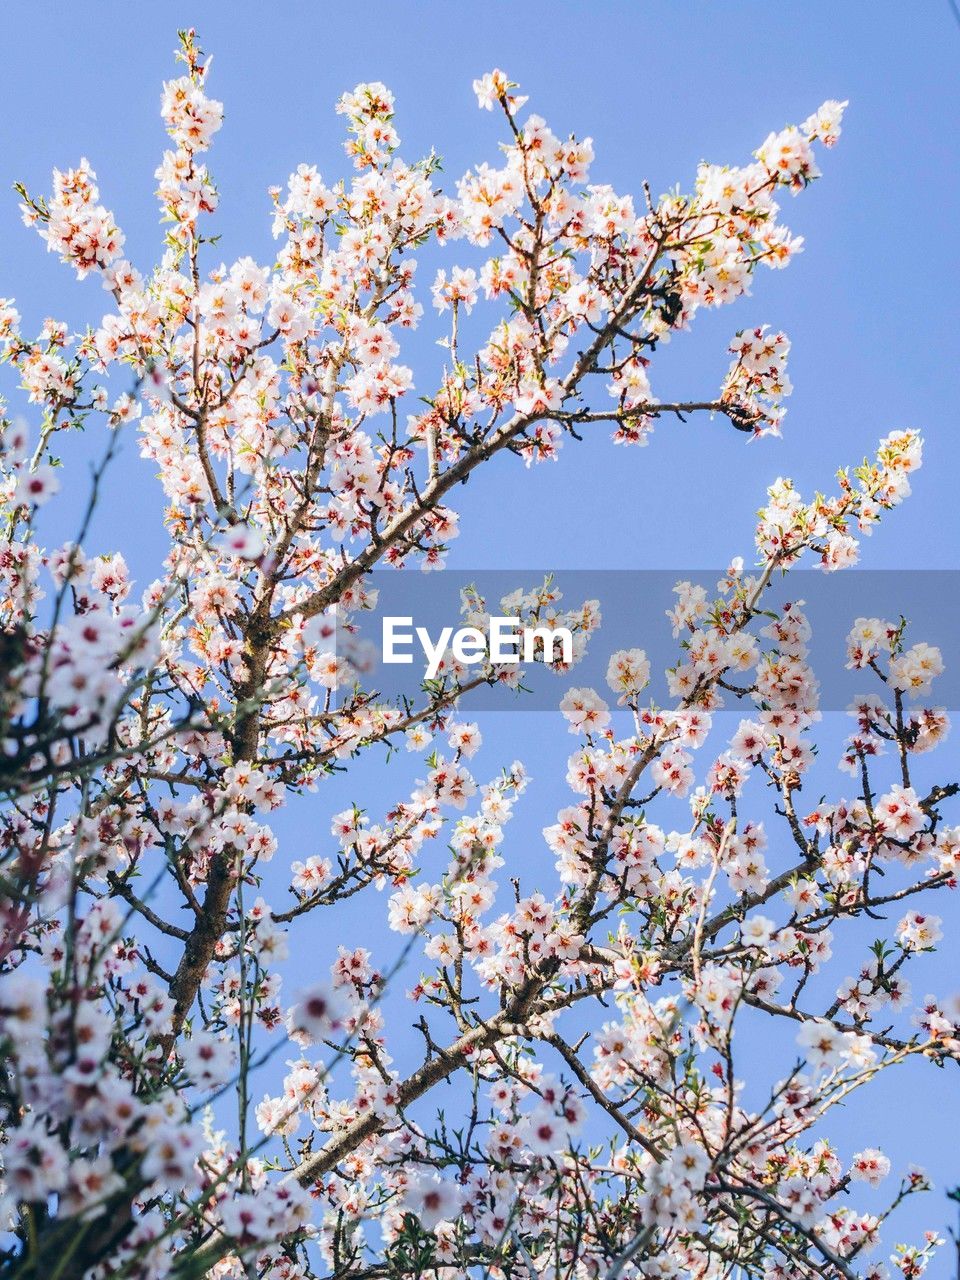 plant, flower, tree, flowering plant, blossom, beauty in nature, growth, springtime, freshness, sky, branch, fragility, nature, low angle view, no people, clear sky, blue, day, spring, cherry blossom, pink, outdoors, fruit tree, botany, produce, sunlight, food and drink